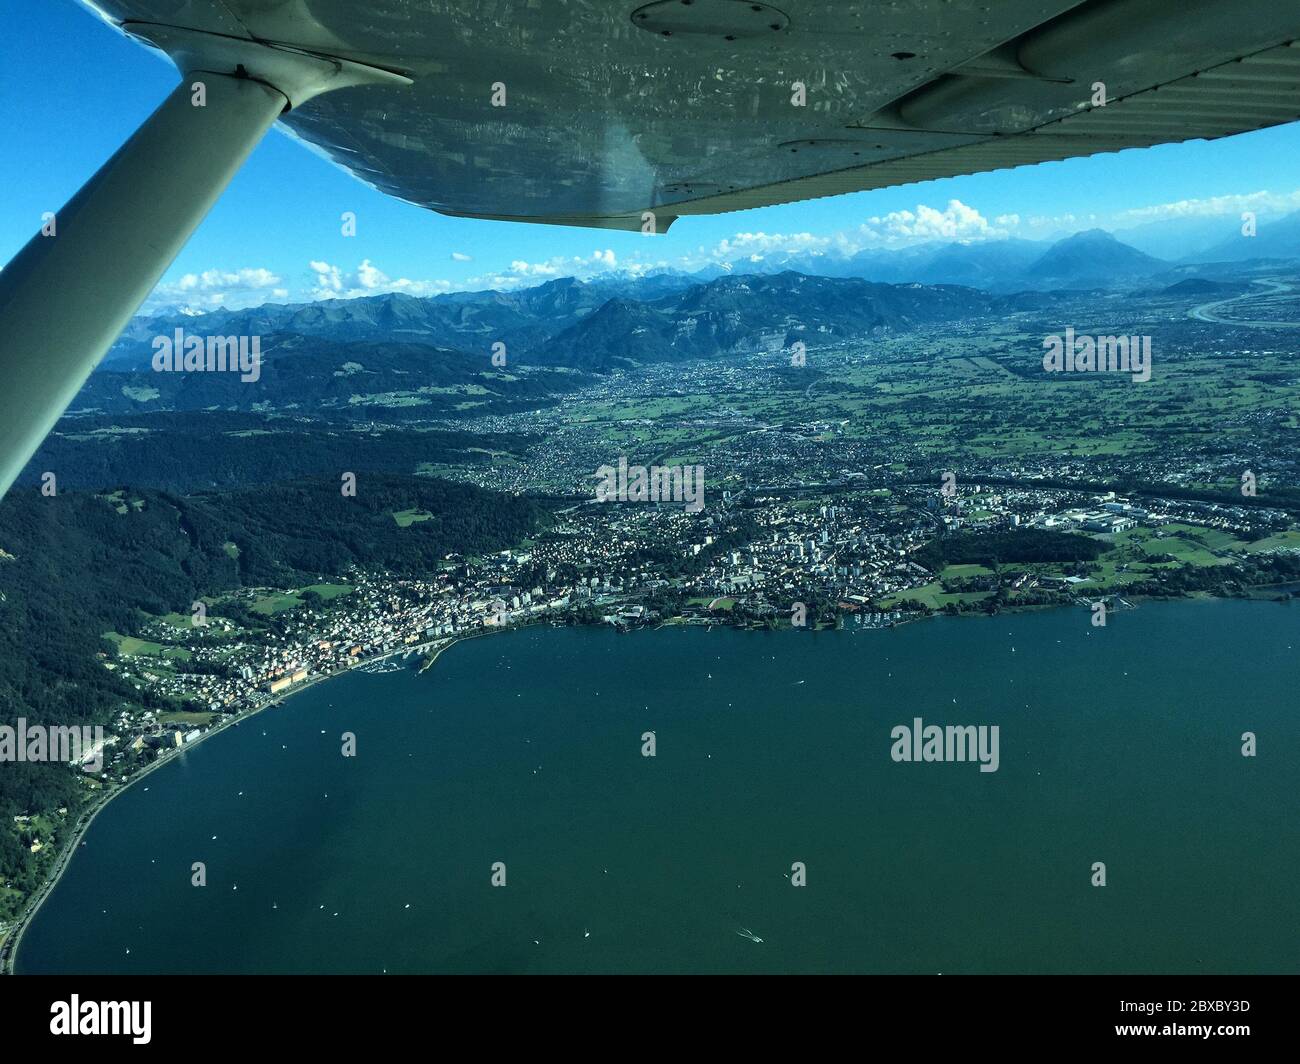 Lake of constance in Switzerland seen from above Stock Photo